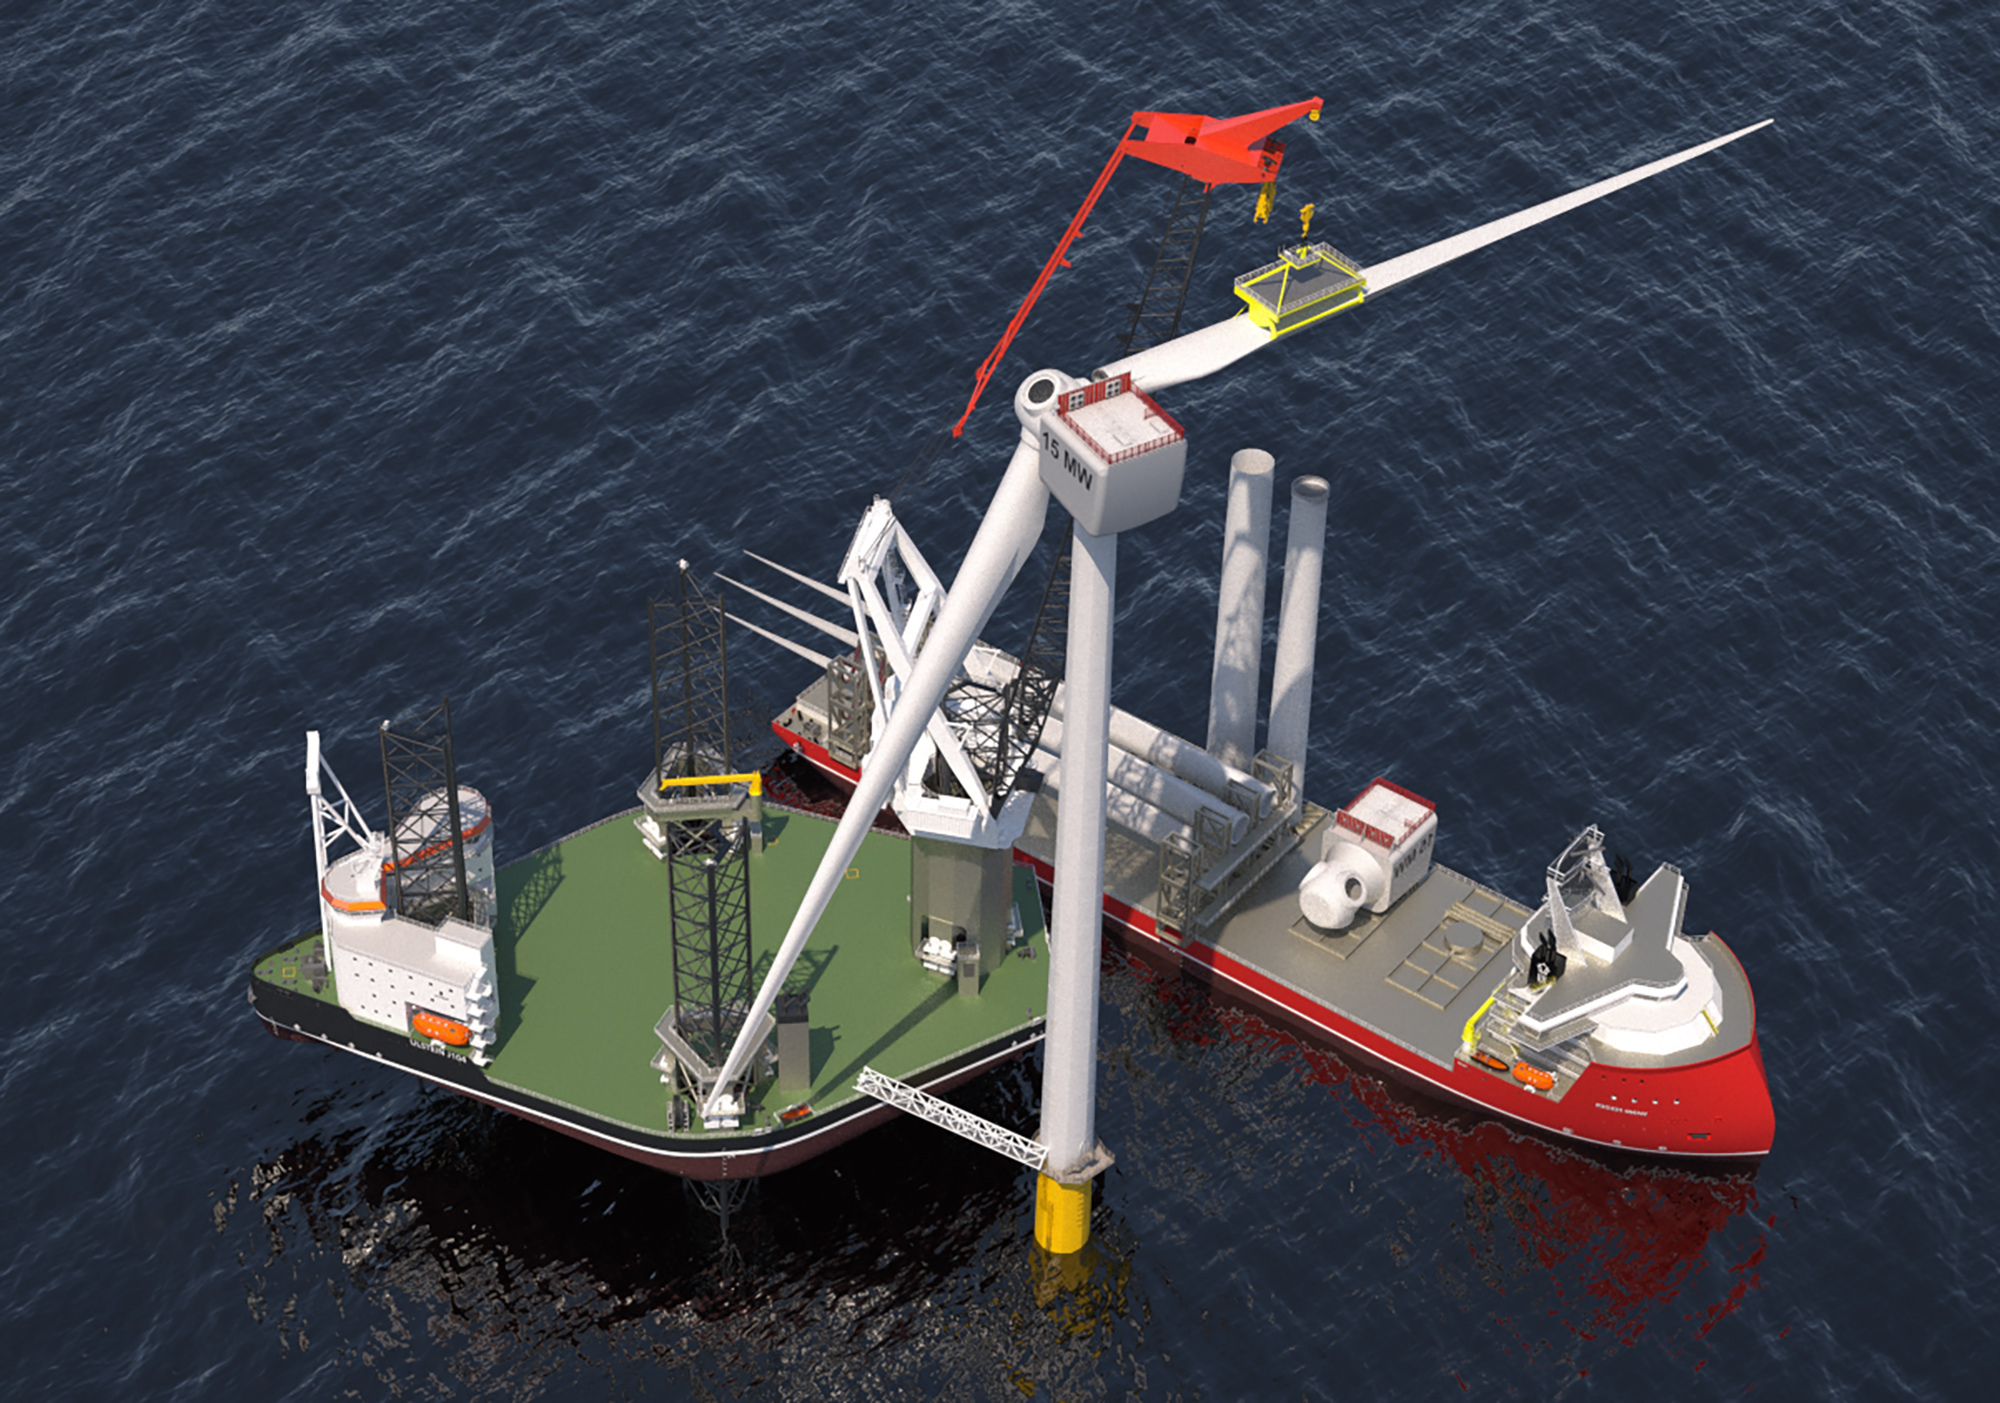 Offshore wind duo, the ULSTEIN J104 jack-up working together with an ULSTEIN HX104 feeder vessel.